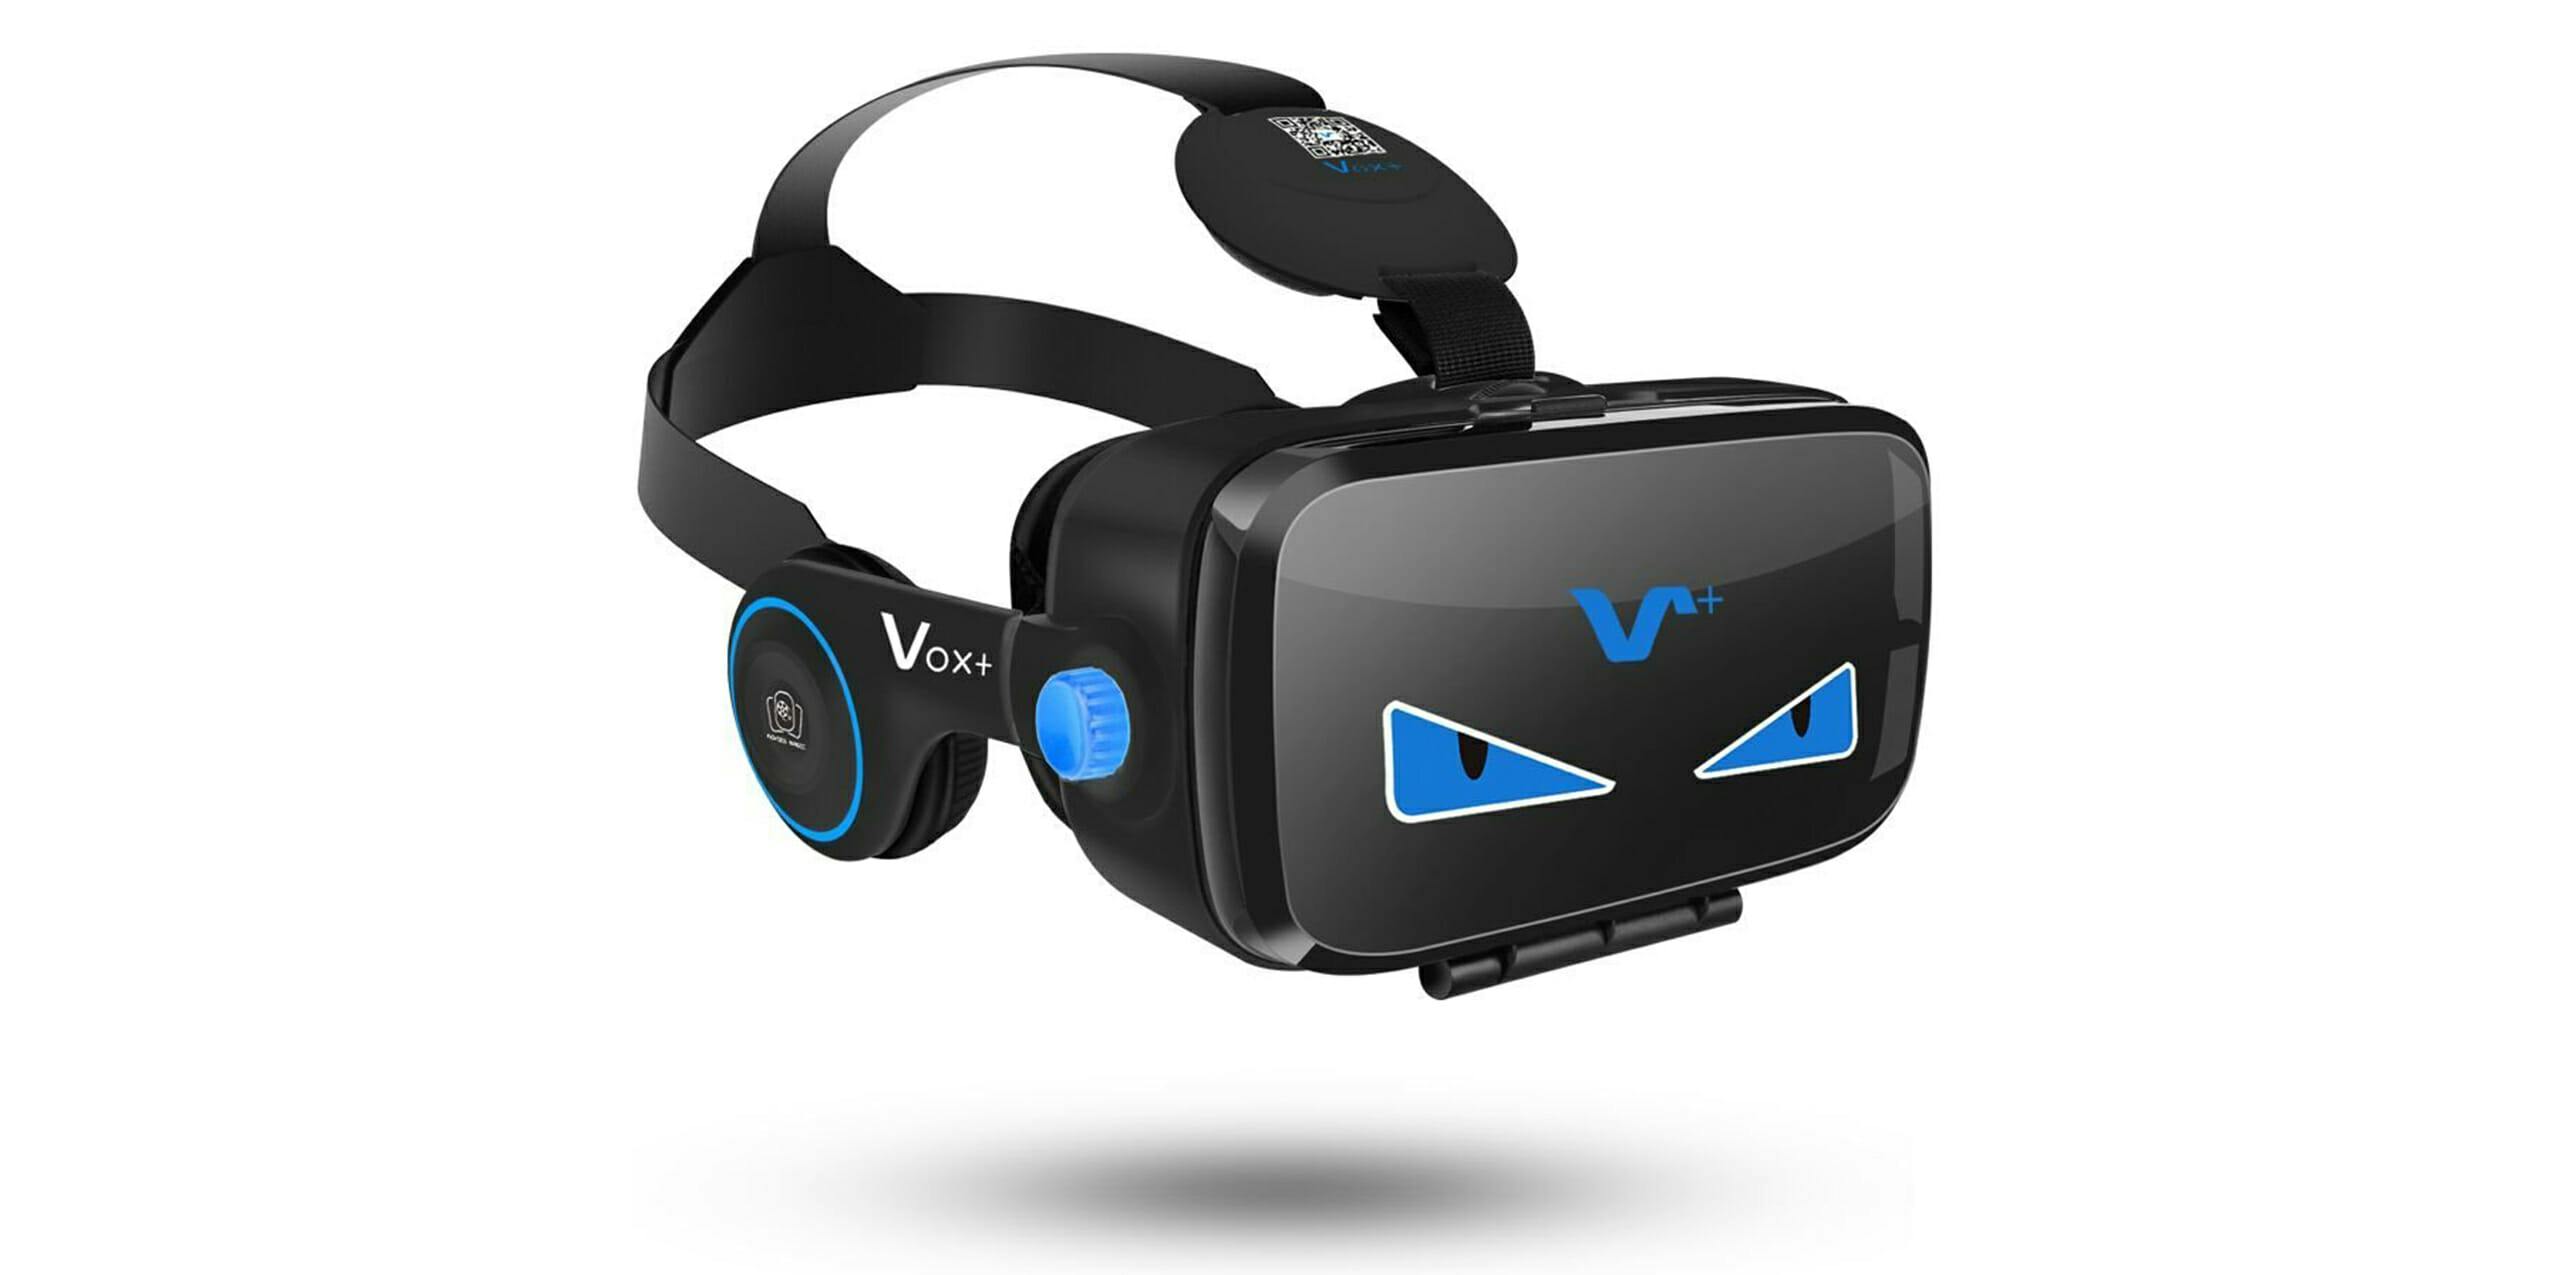 best vr headsets